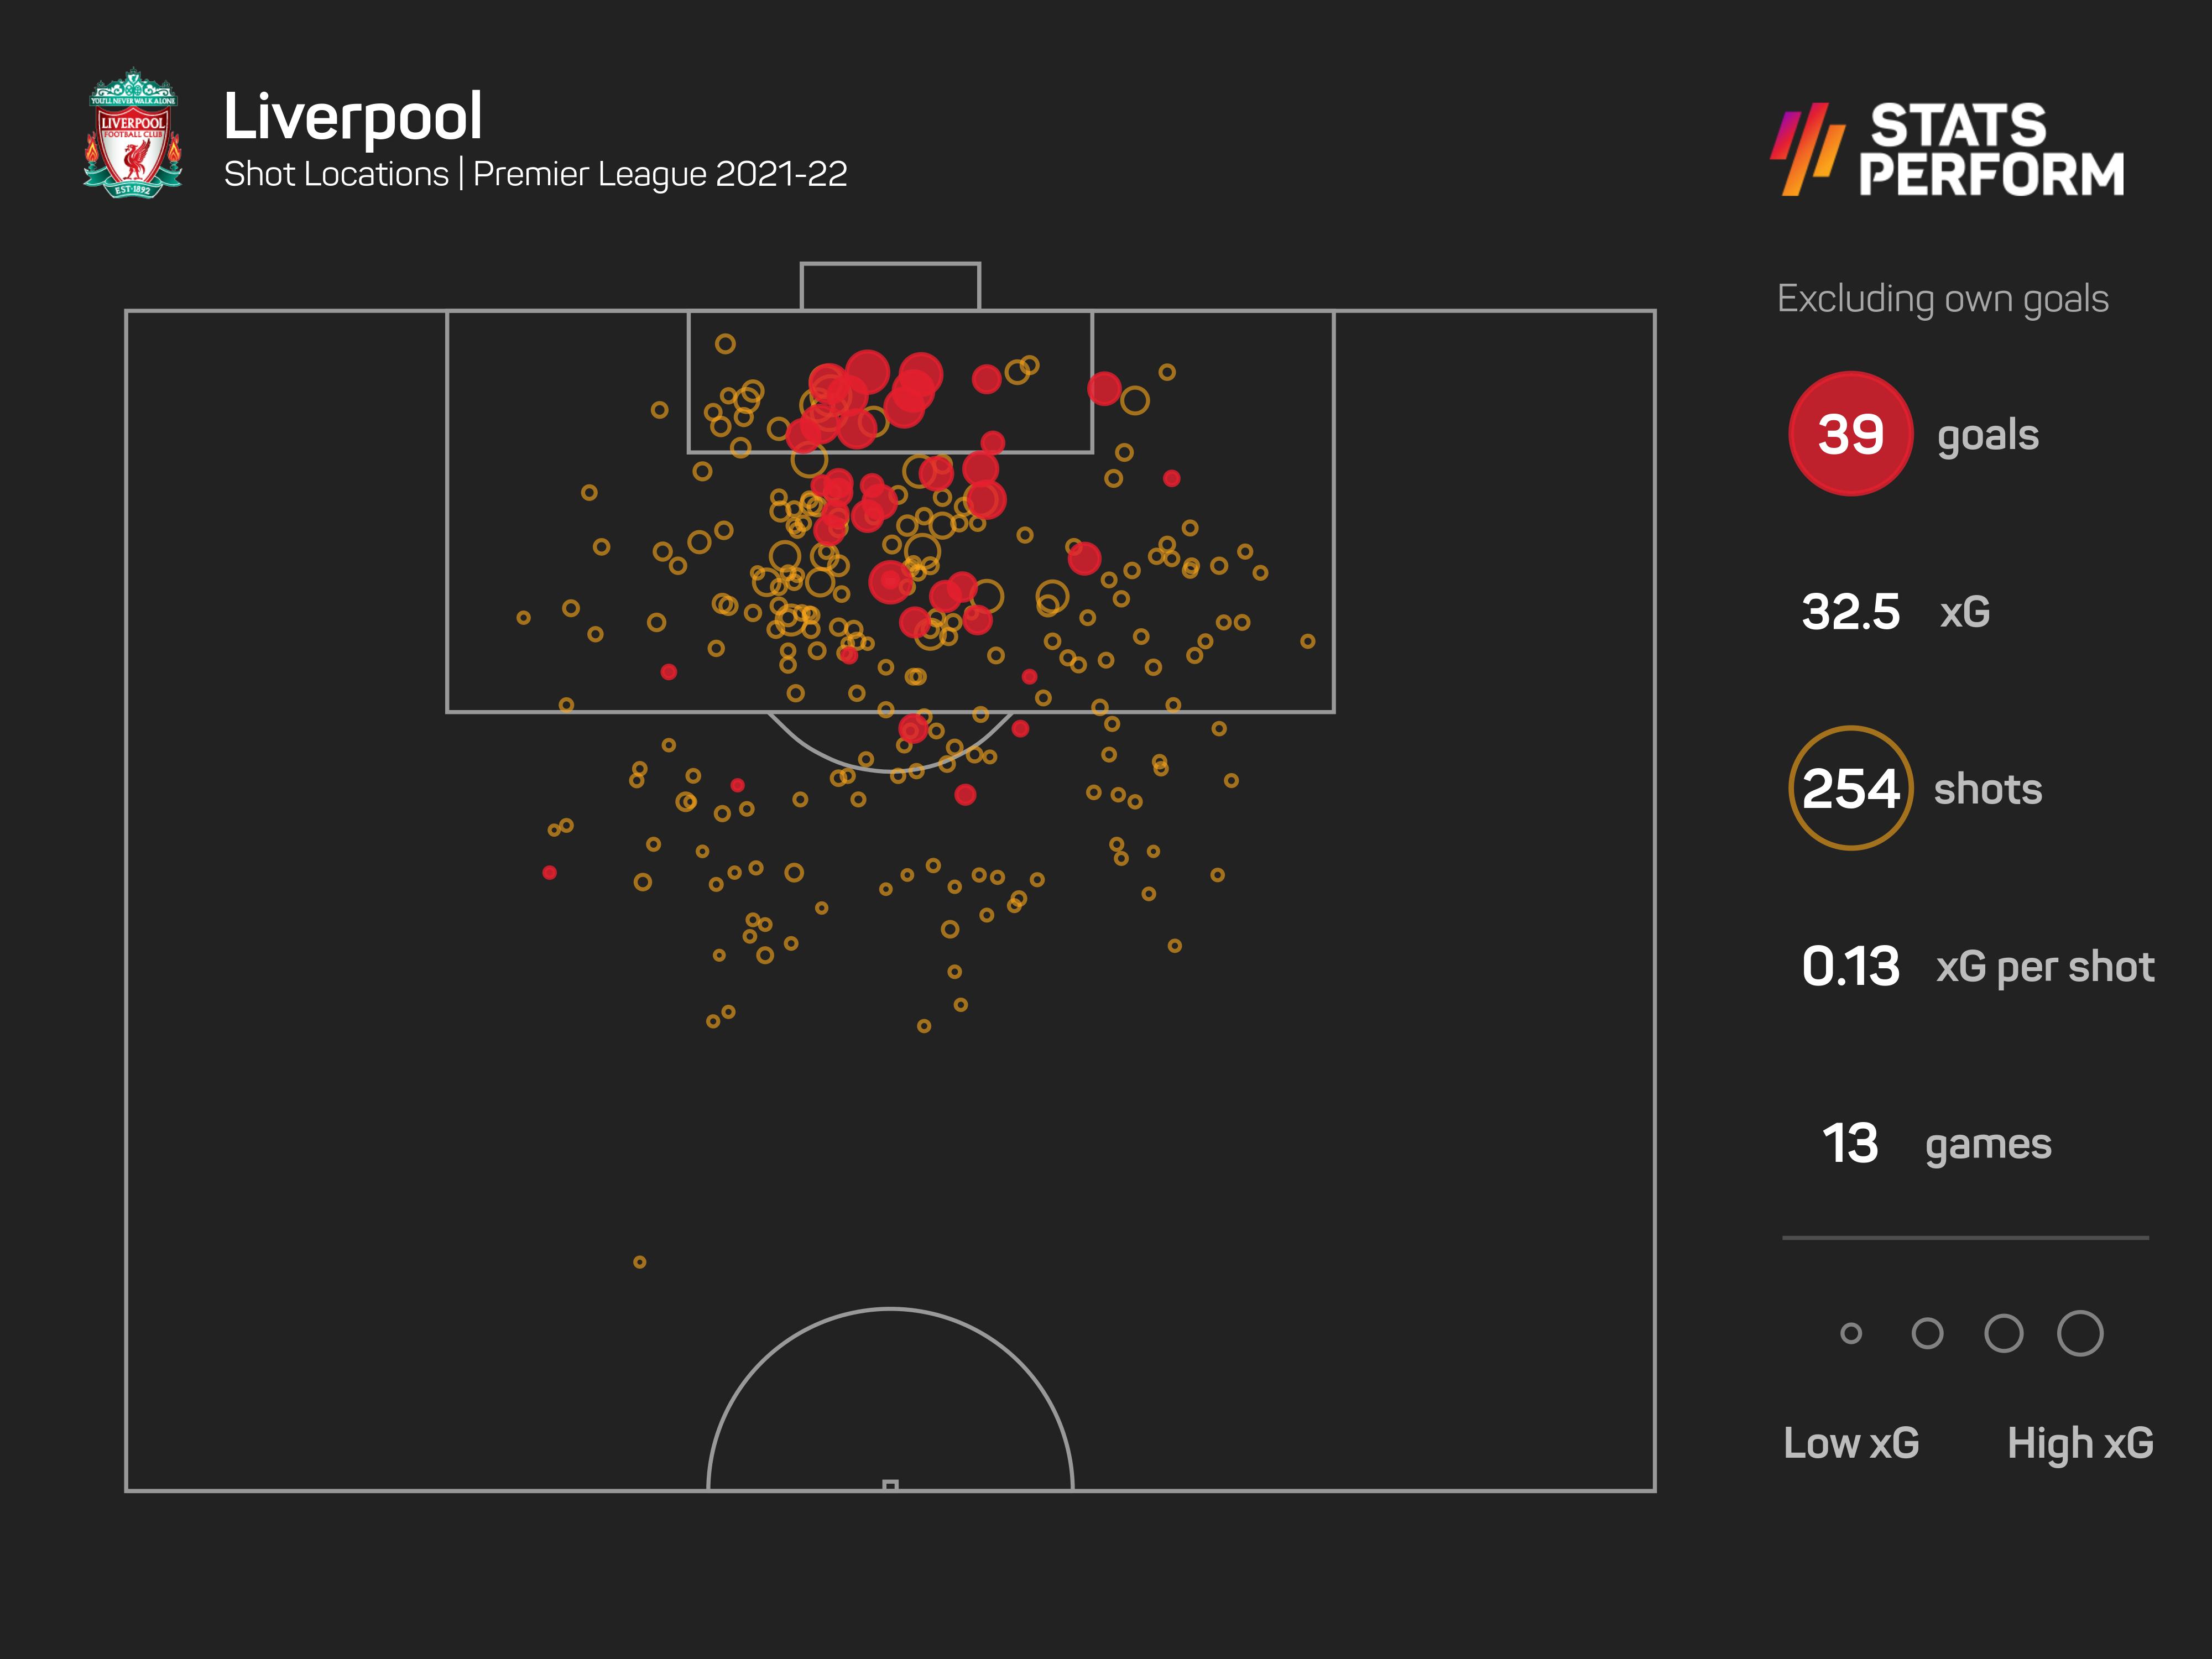 Liverpool's attack has been rampant this season